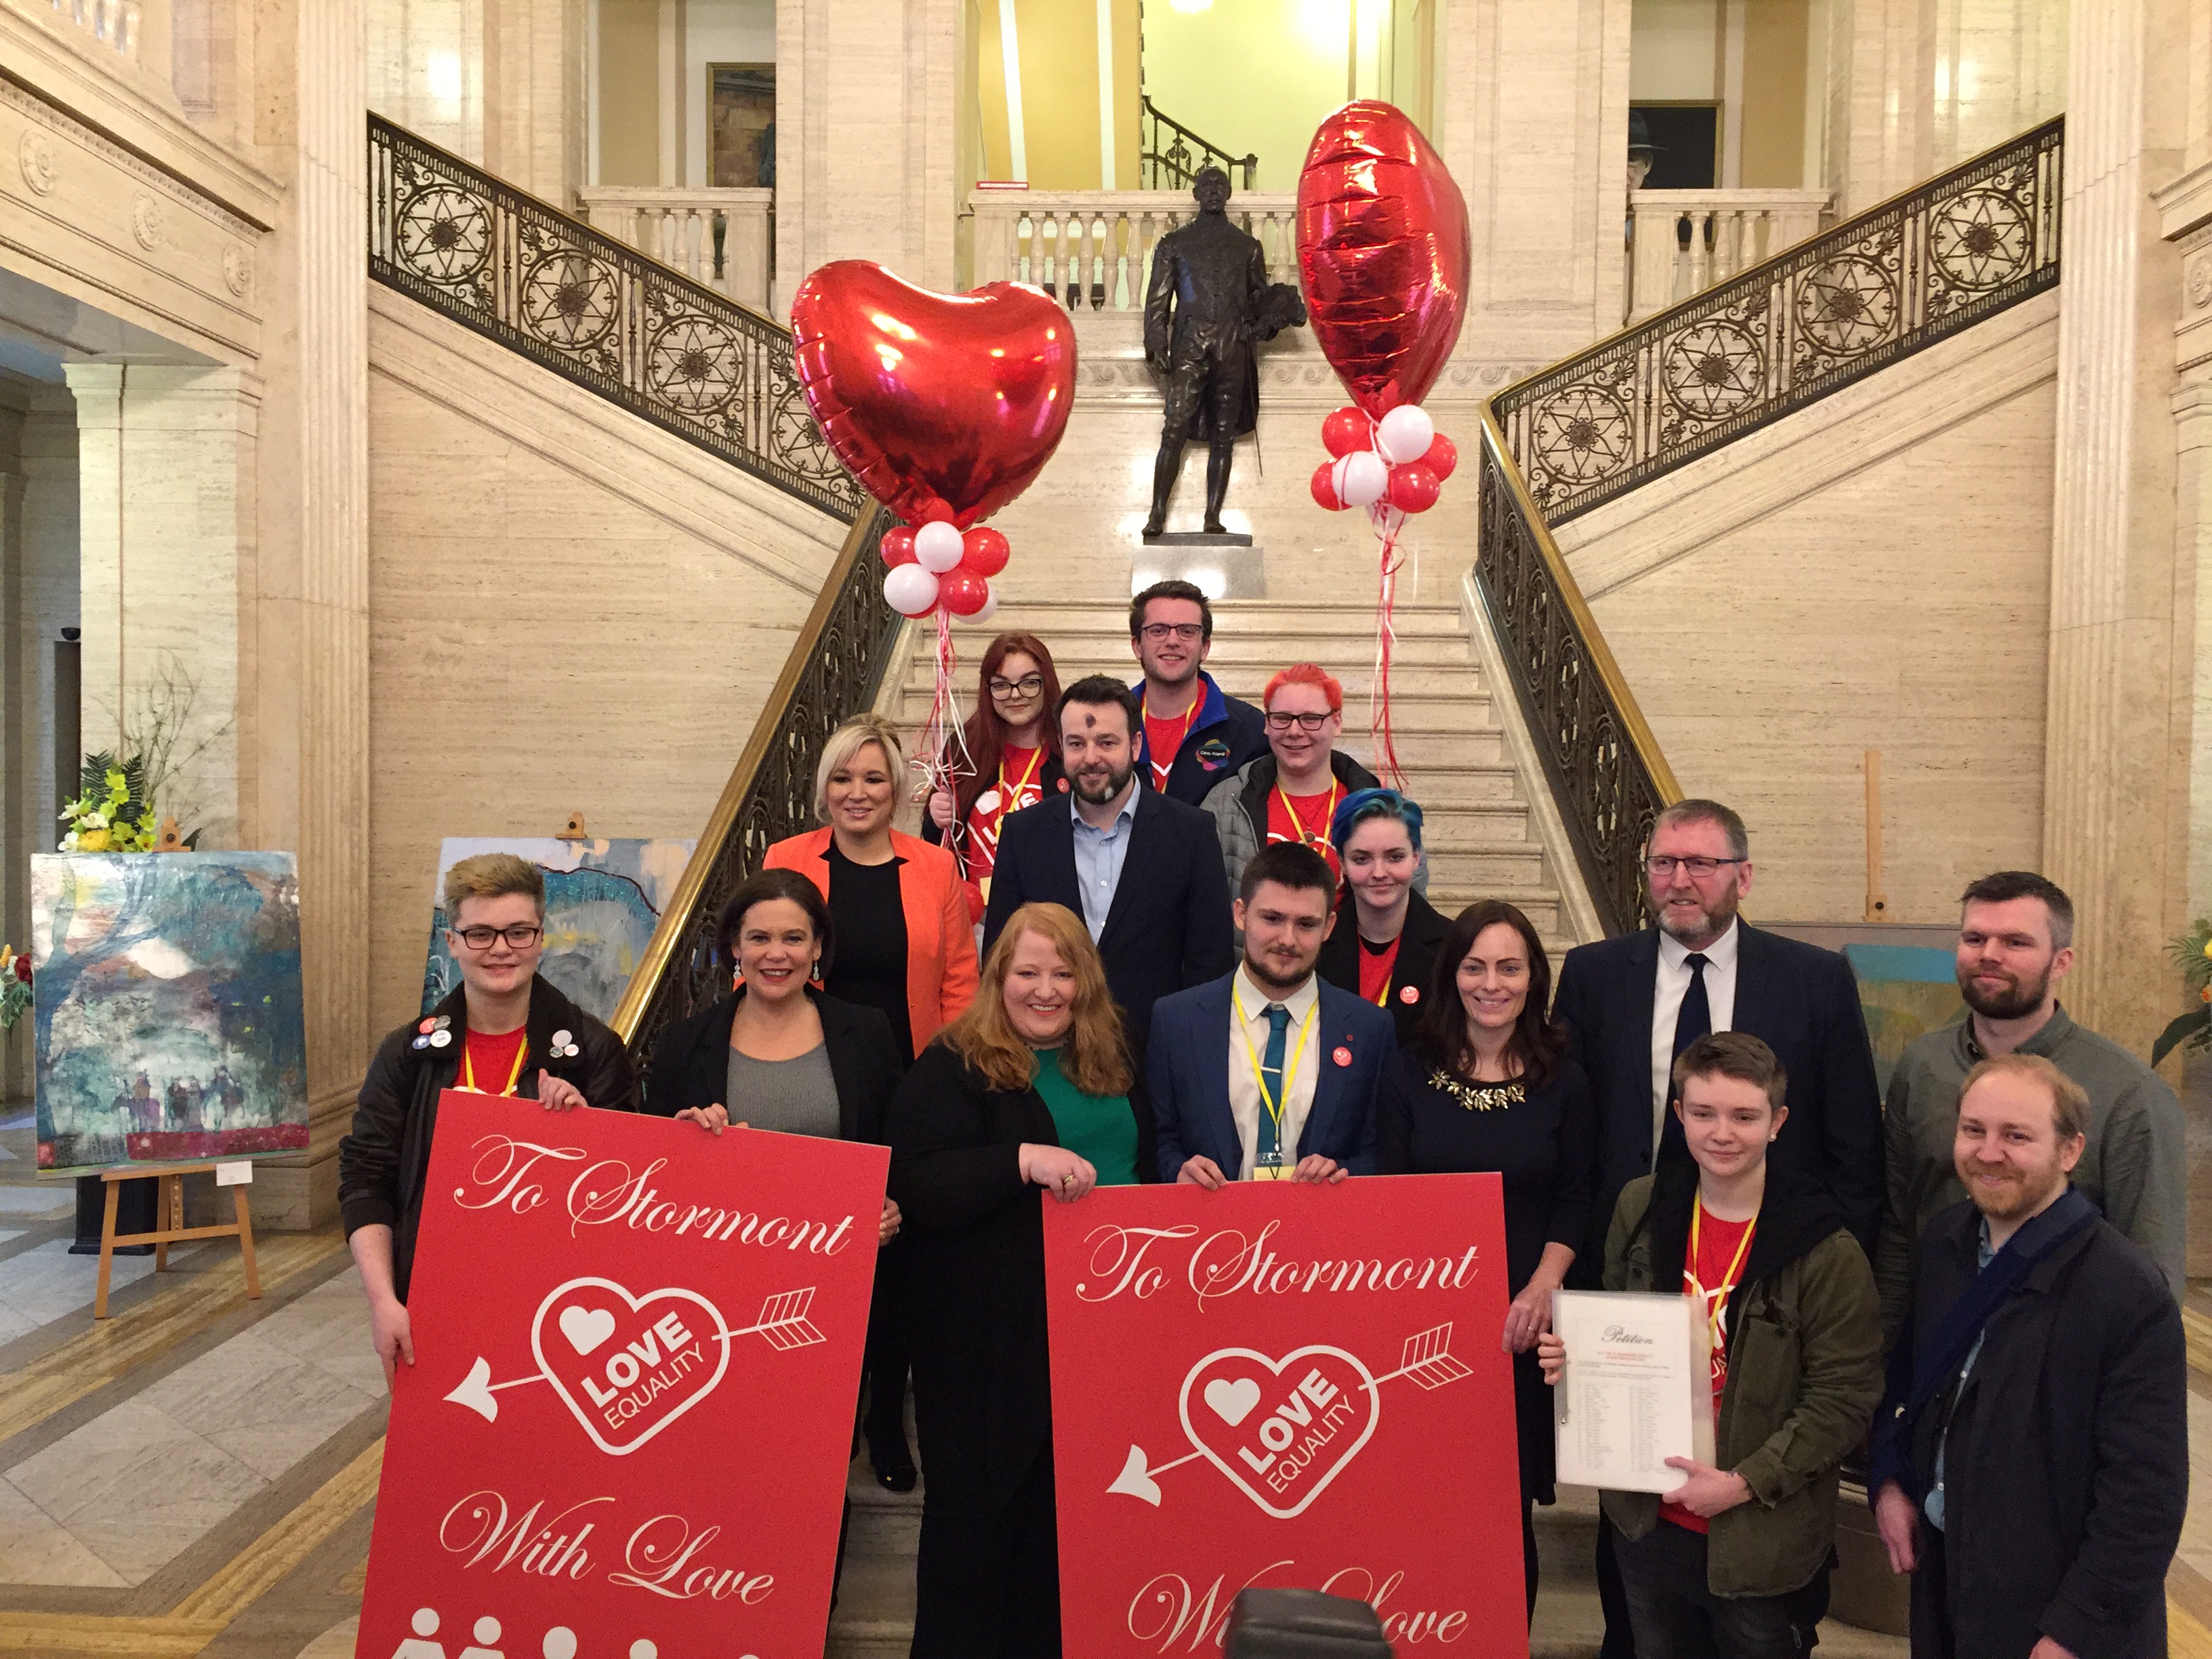 Same-sex marriage campaigners delivered Valentine’s Day cards to Stormont as talks to restore powersharing rumble on (David Young/PA)